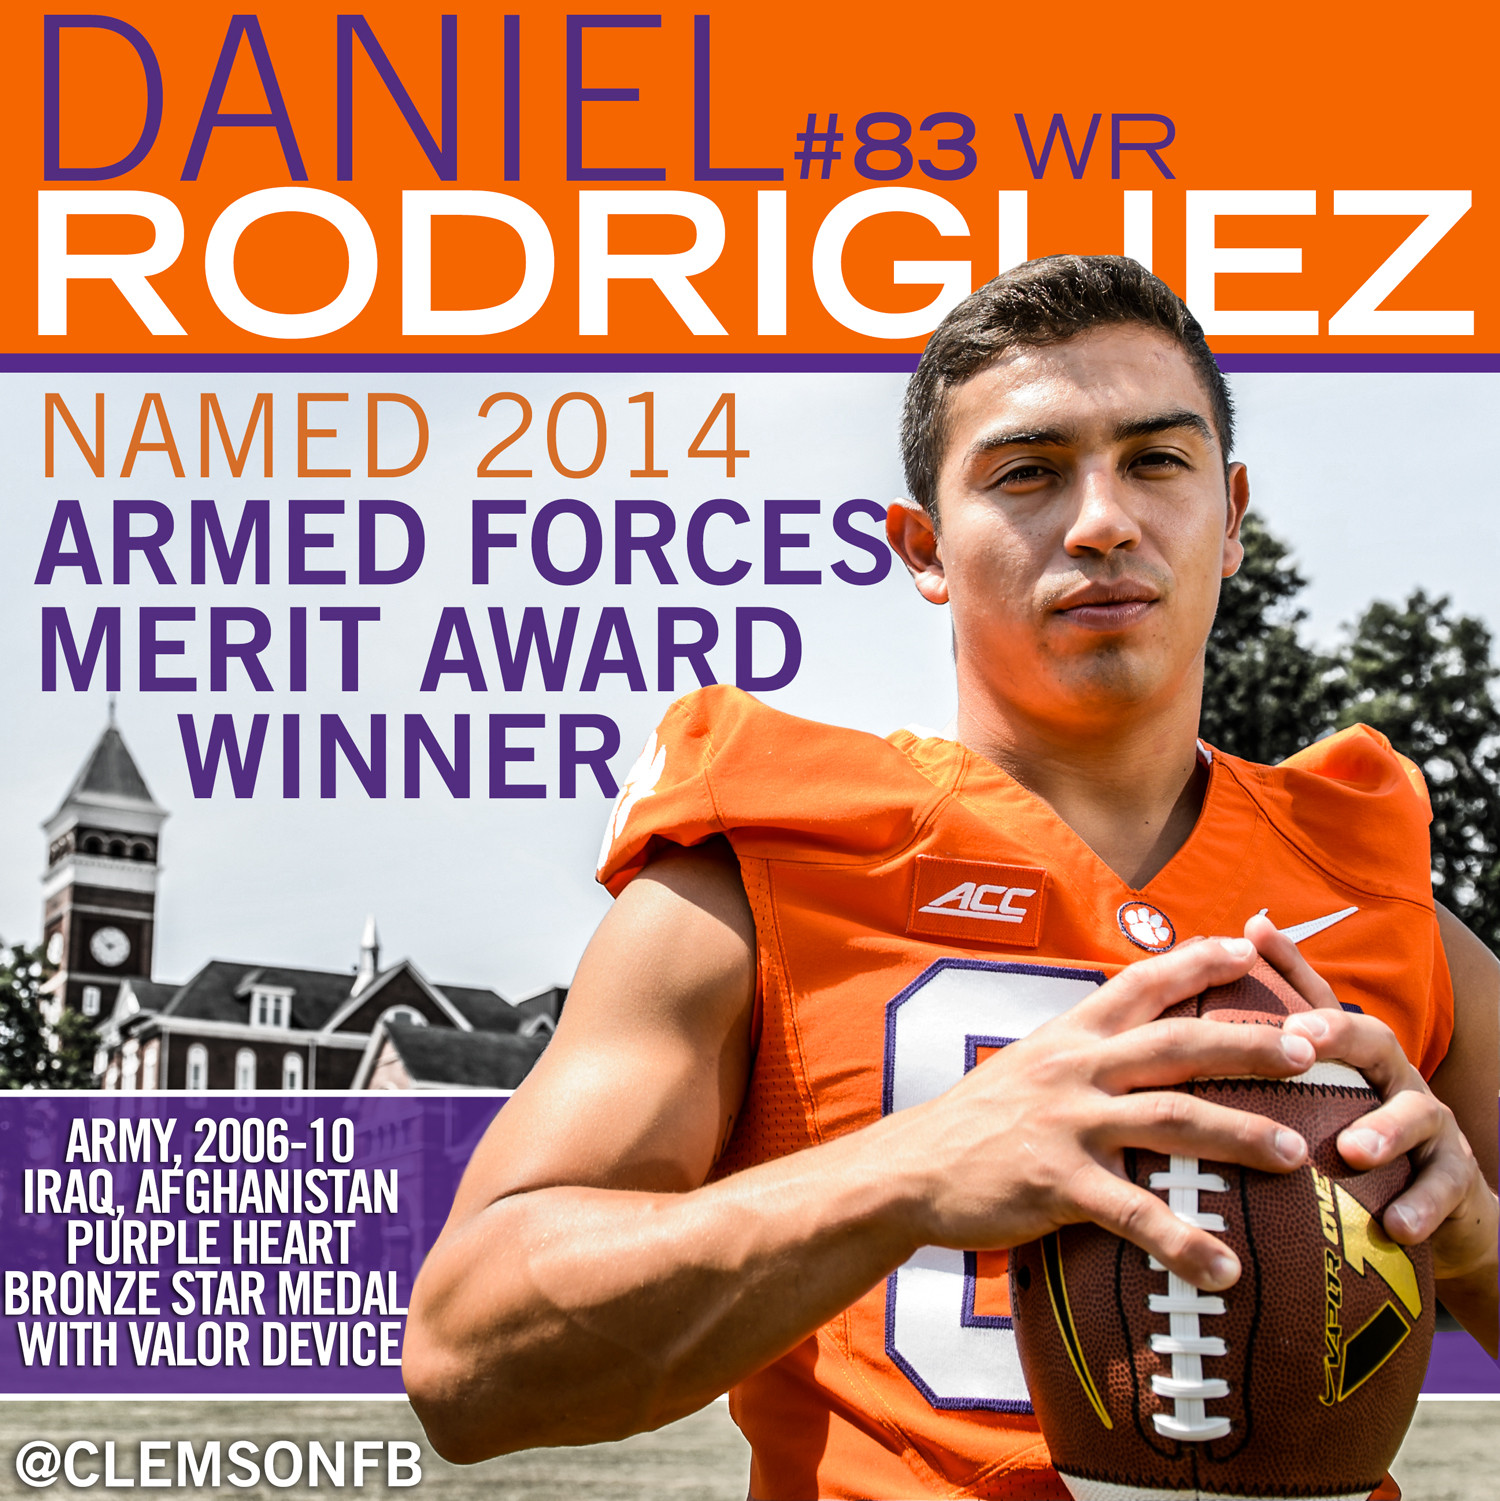 Rodriguez Honored With Armed Forces Merit Award